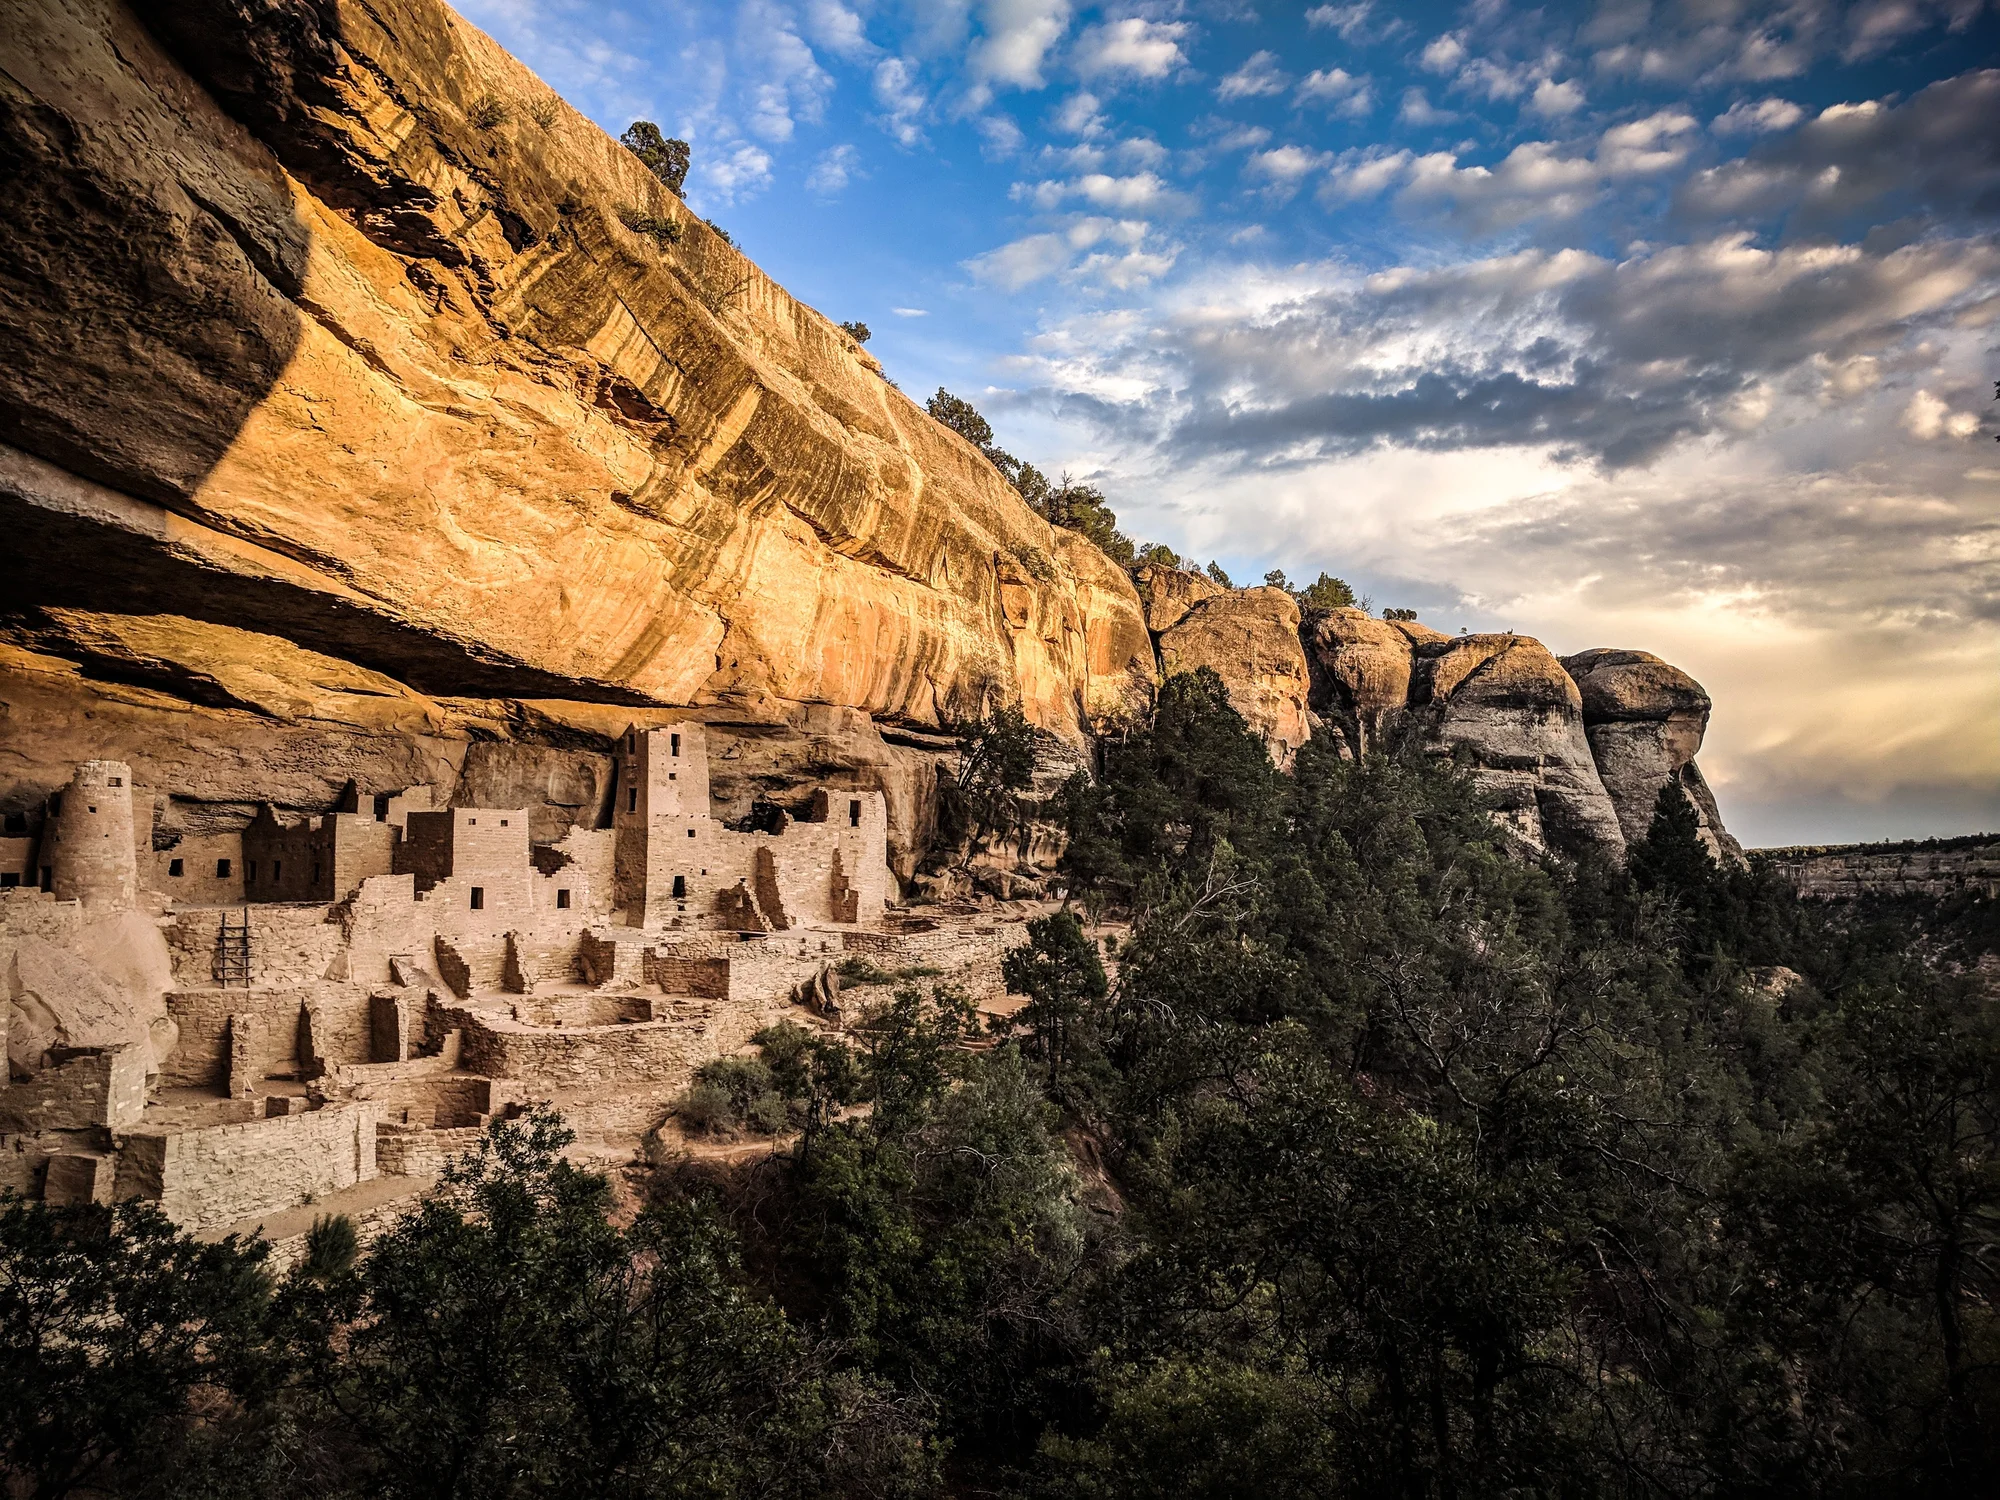 A picturesque landscape with forest in the foreground, and a view of ancient cliff dwellings carved into the side of a mountain in the middle of the photo. A cloudy sky is above.